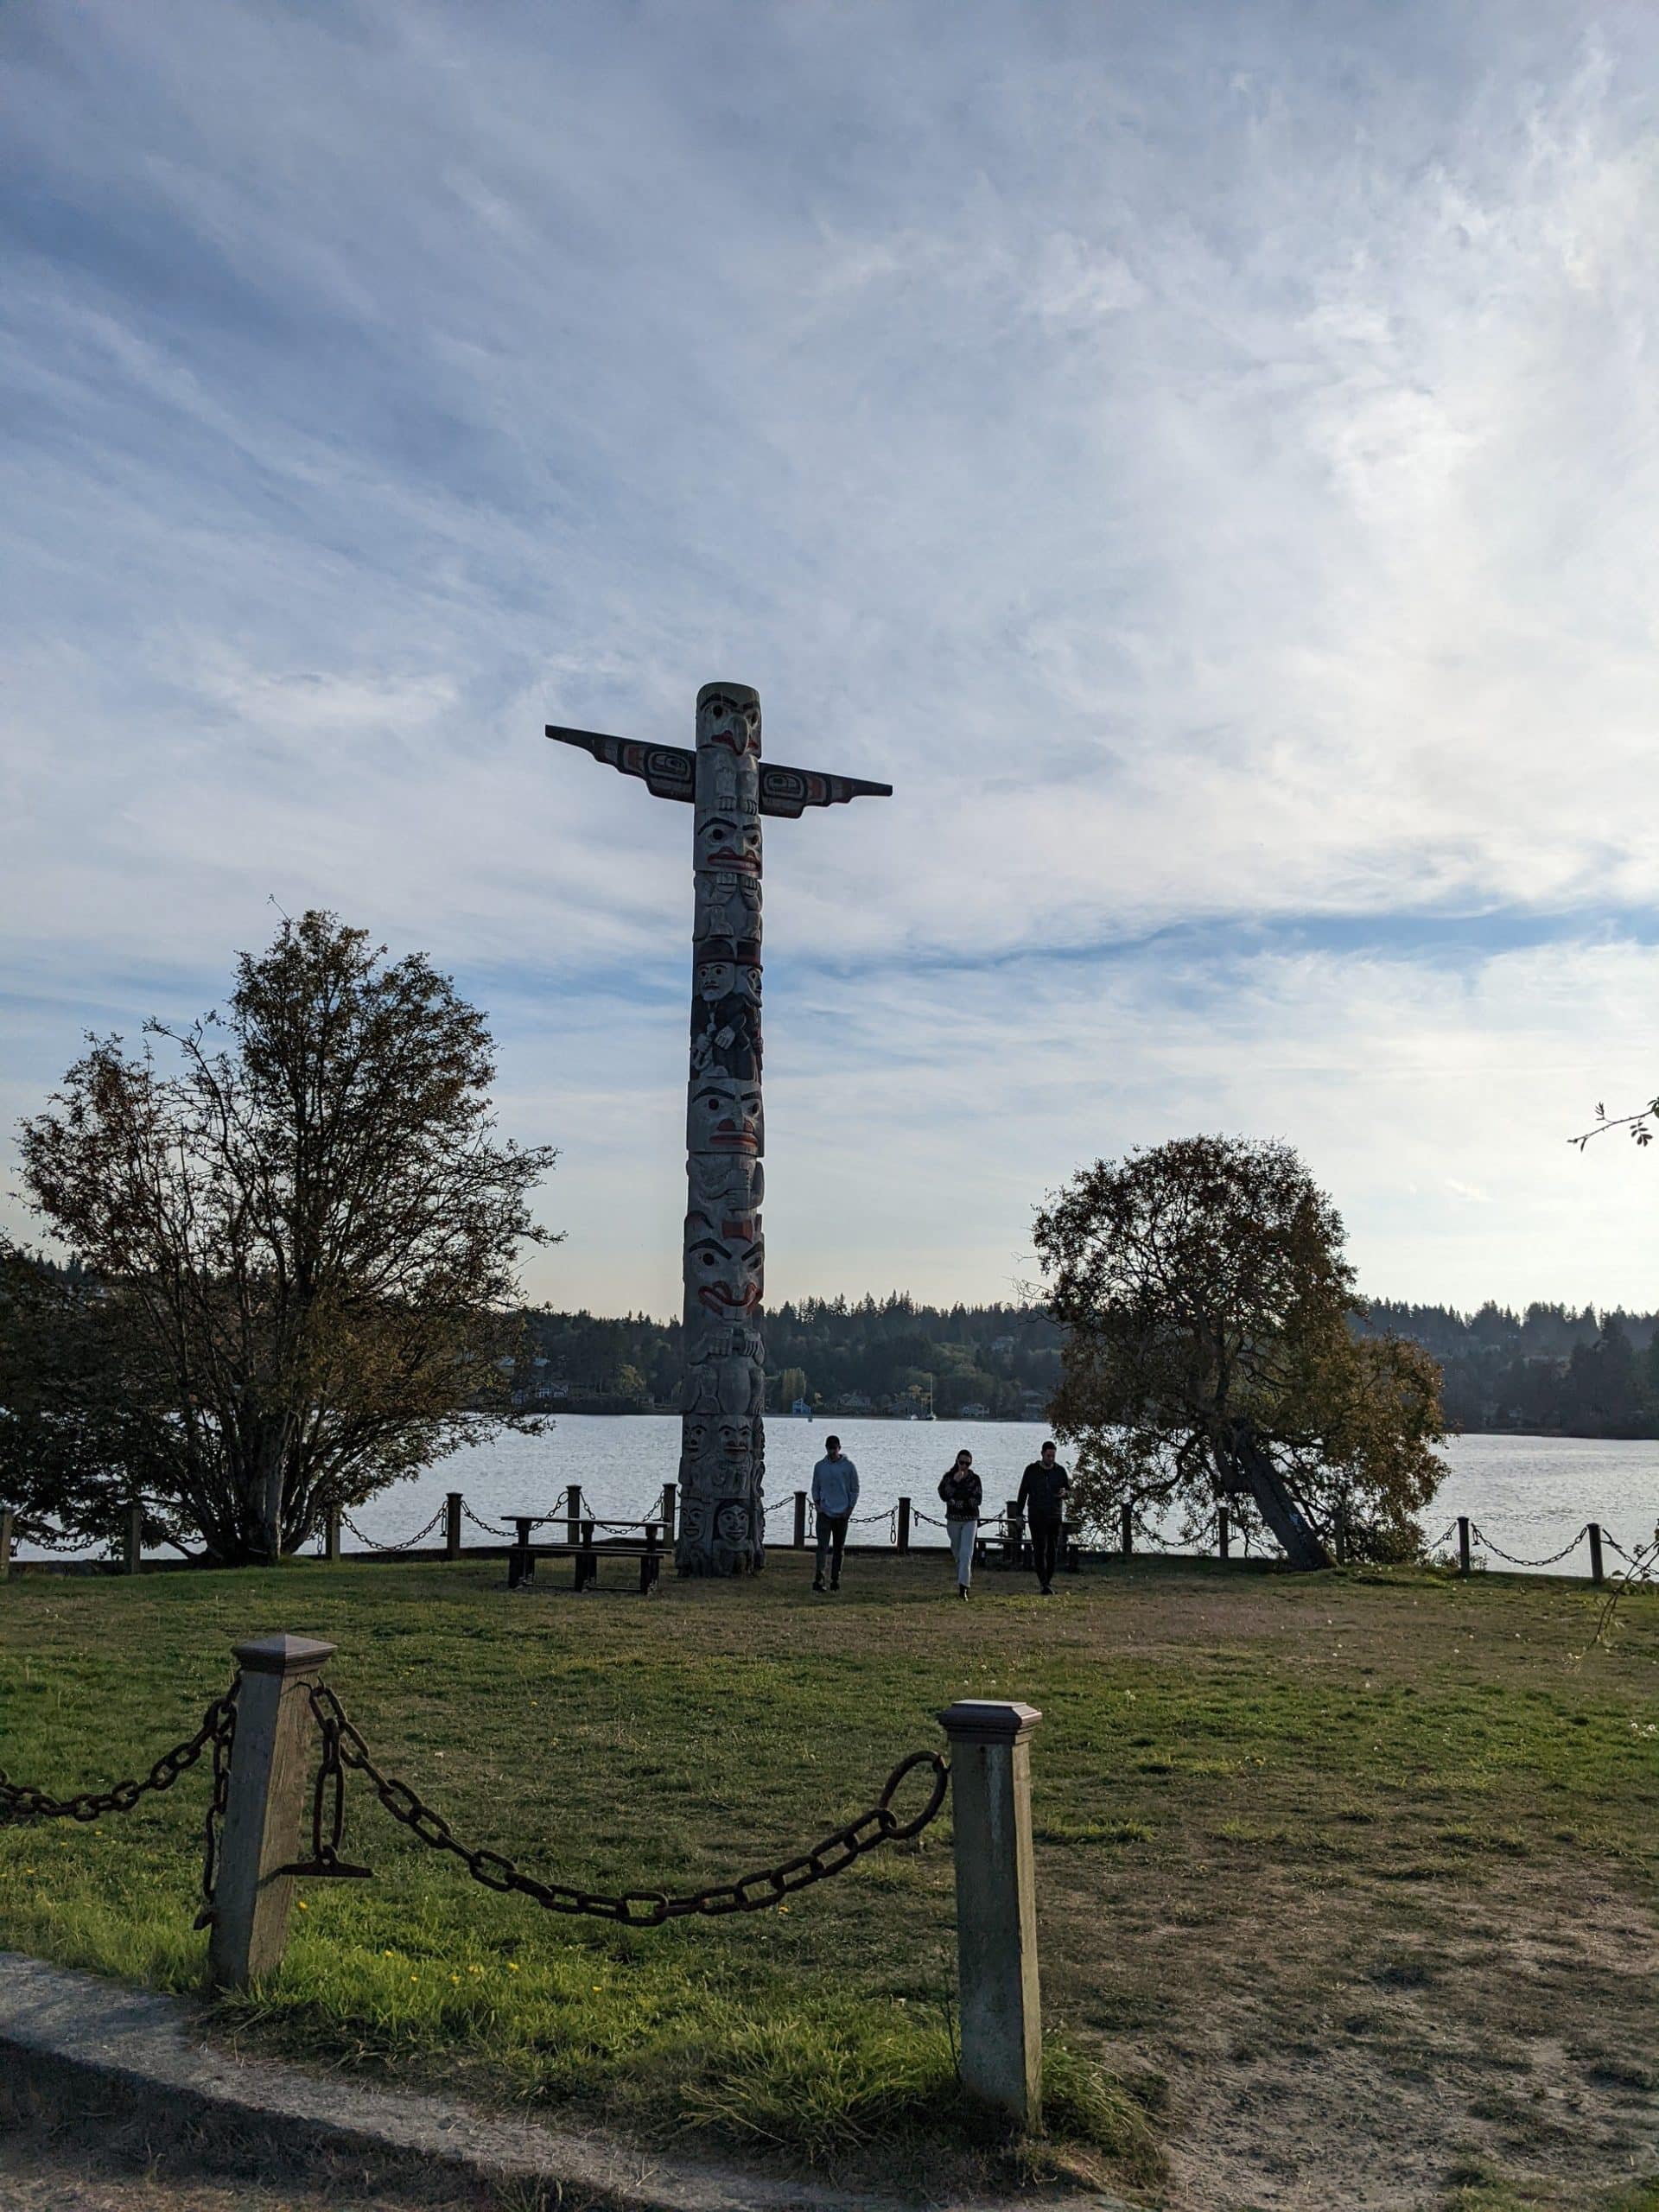 Three employees walk back from the totem pole on the peninsula in Port Ludlow during the 2022 TUNE retreat